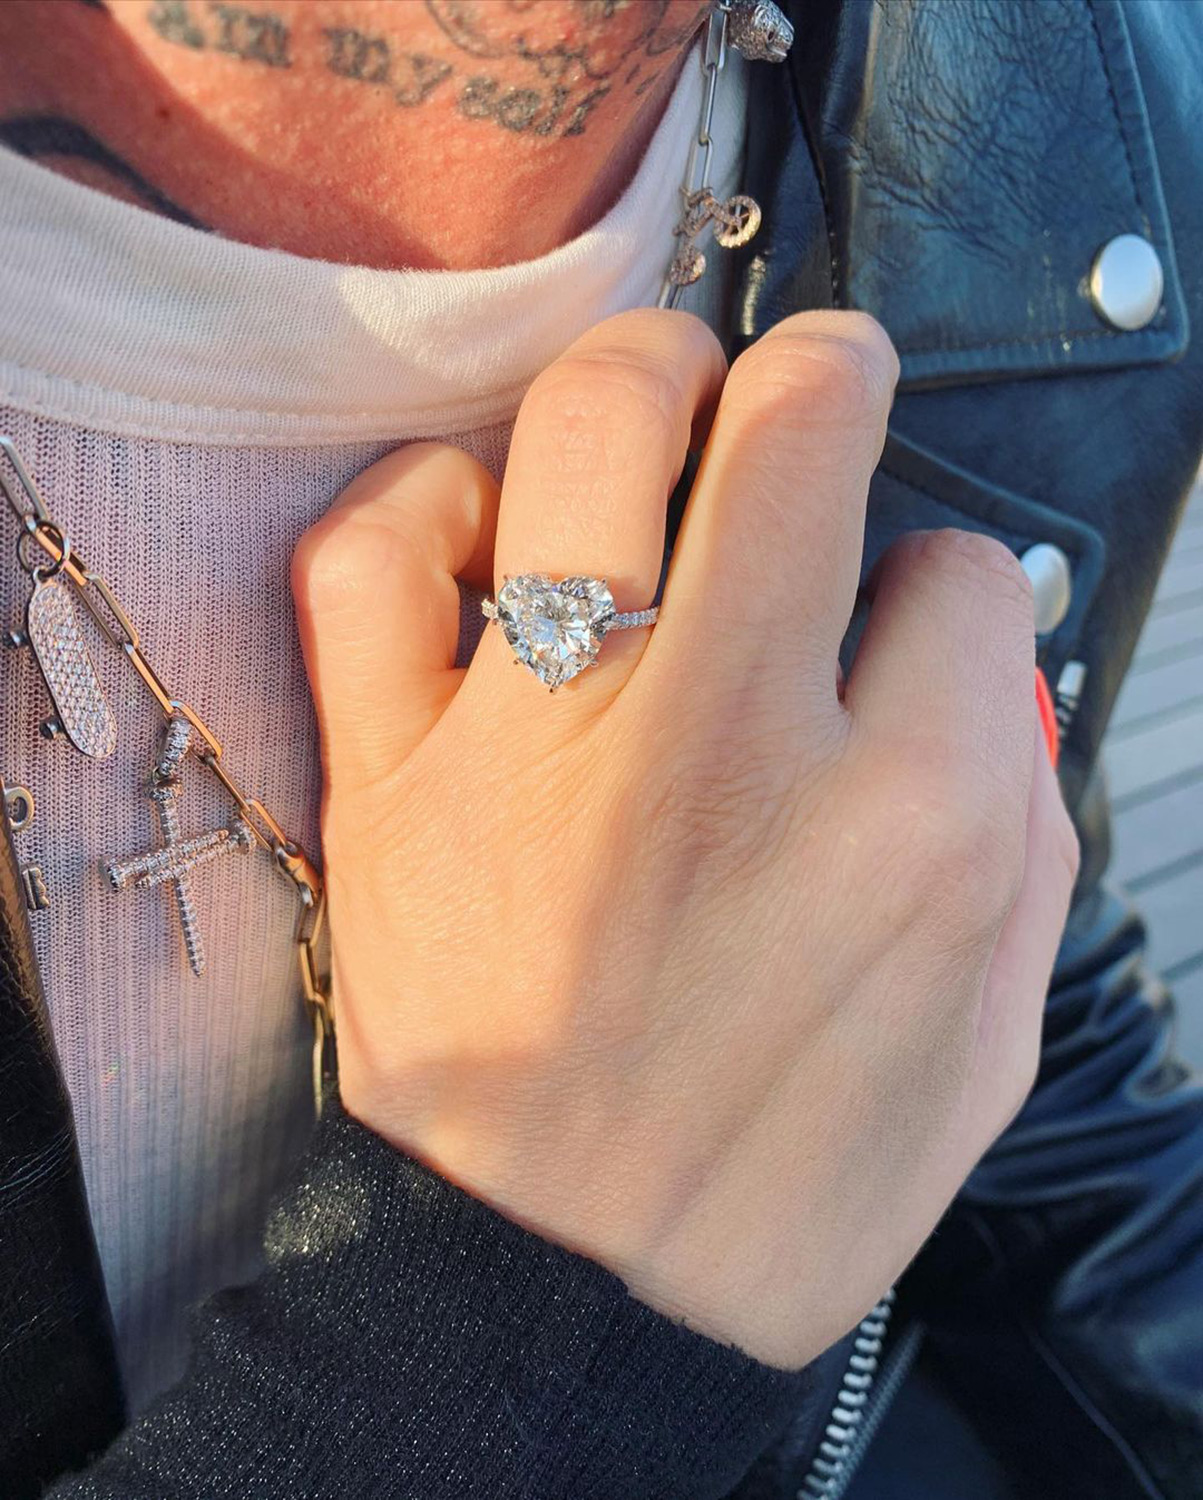 Avril Lavigne Mod Sun Paris Proposal Moment with Heart Shaped Diamond Ring on Hand